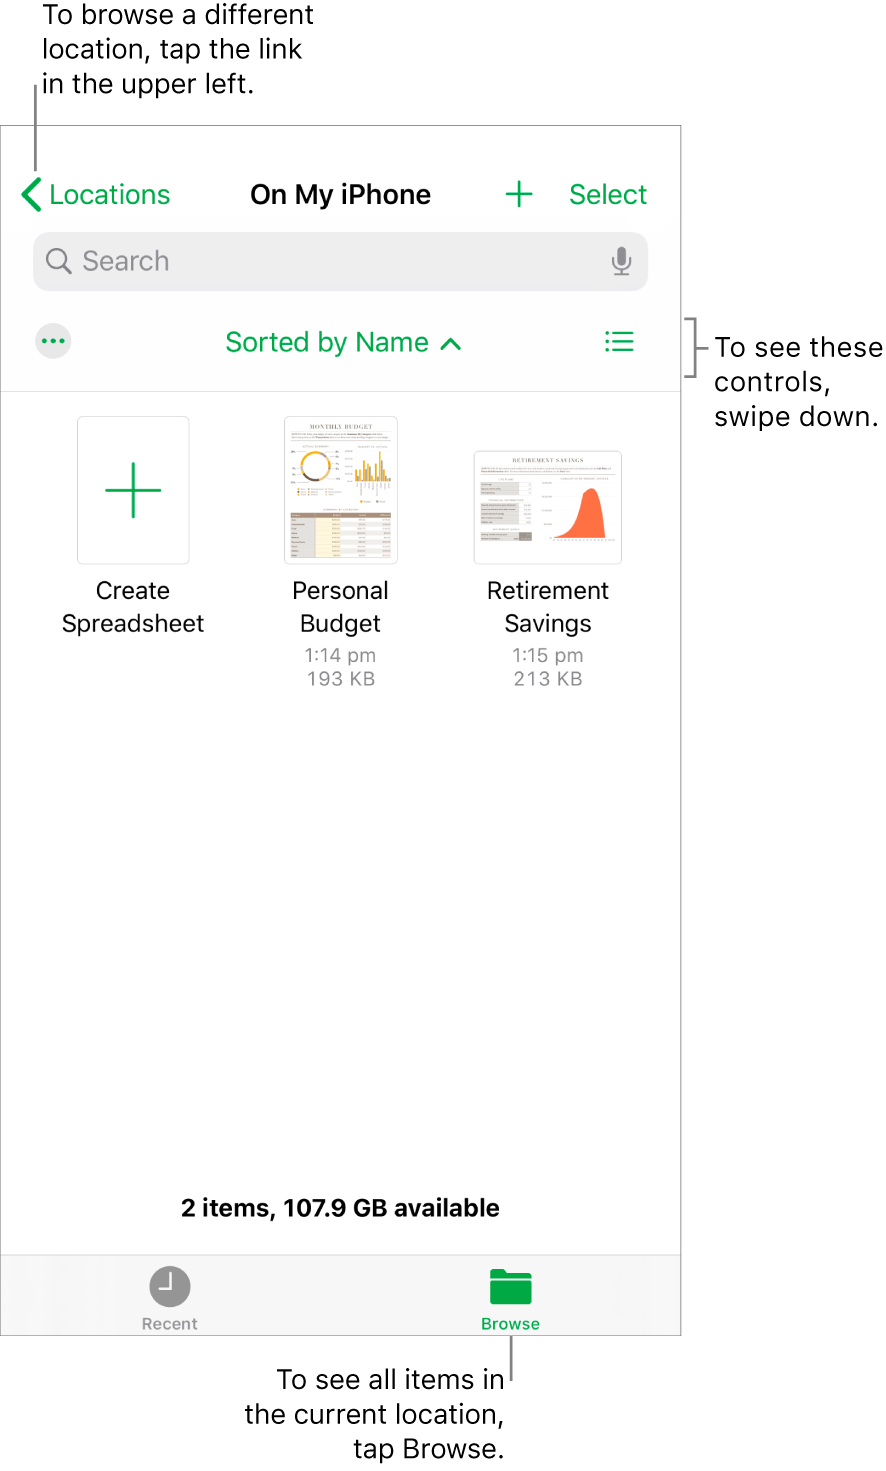 The spreadsheet manager for iPhone.